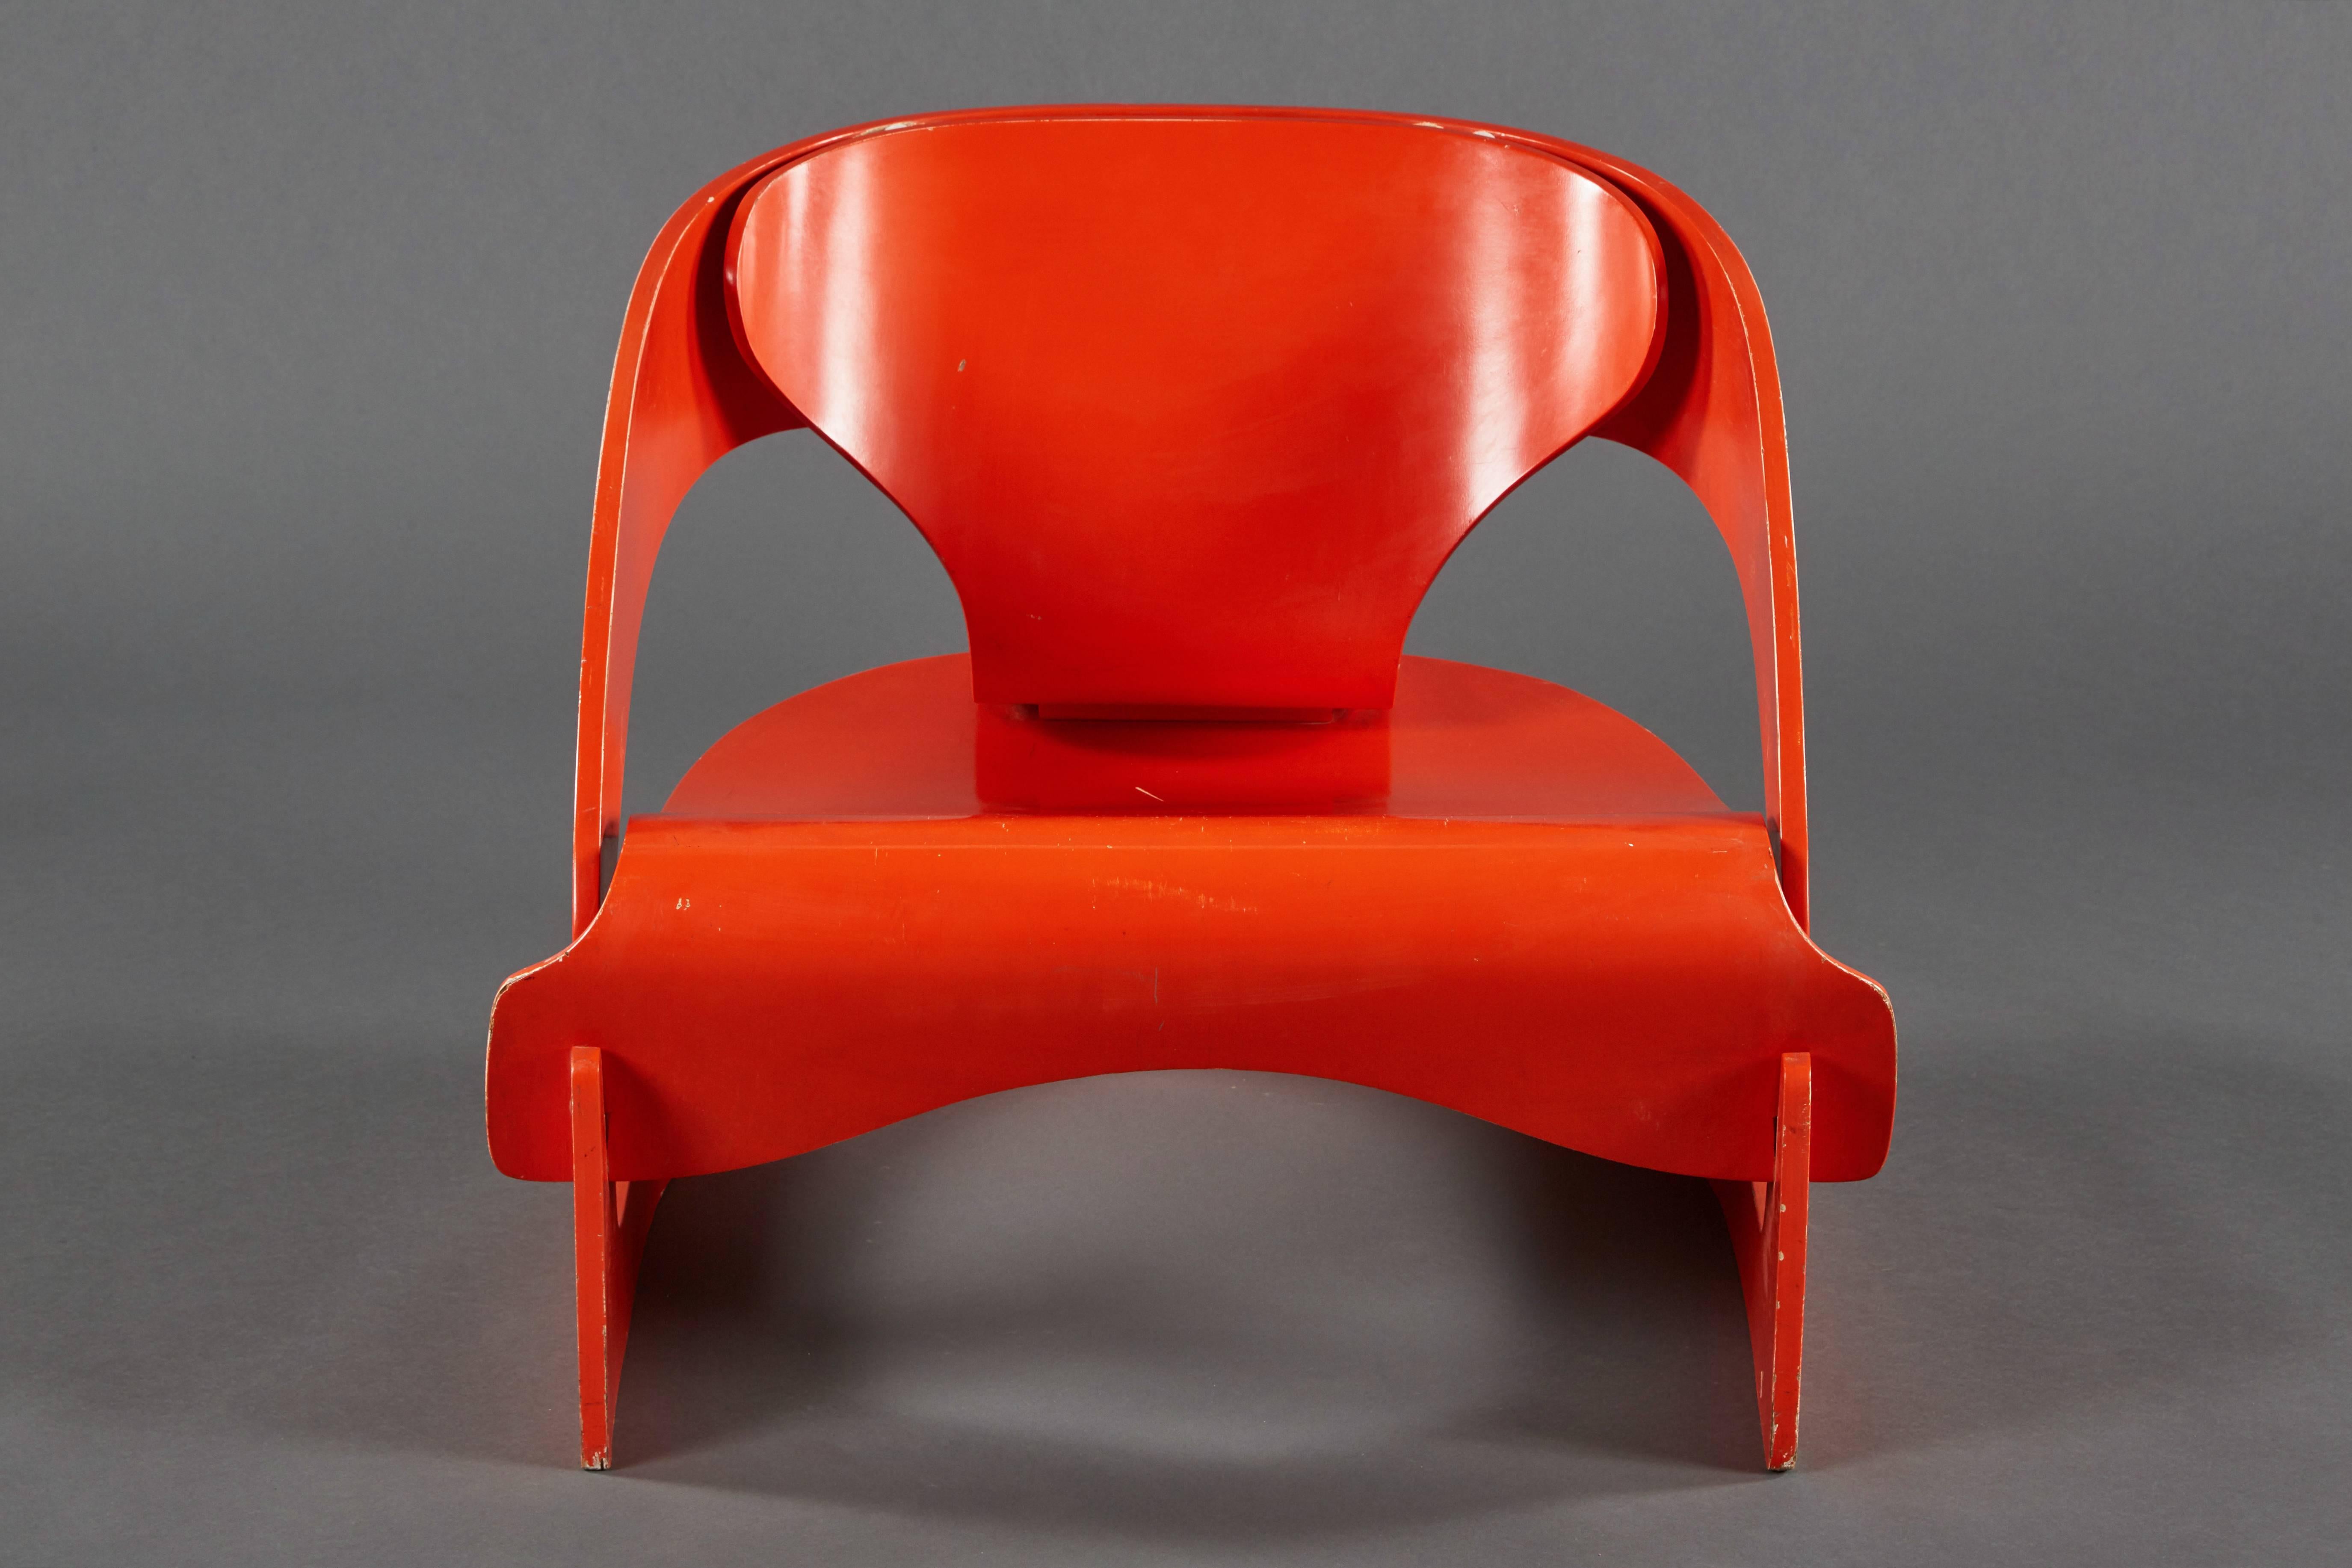 A red lacquered sculptural Joe Colombo No. 4801 “Interlocking” chair. The body is composed of three separate pieces of molded interlocking plywood without any metal fittings. Designed for Kartell in 1963.